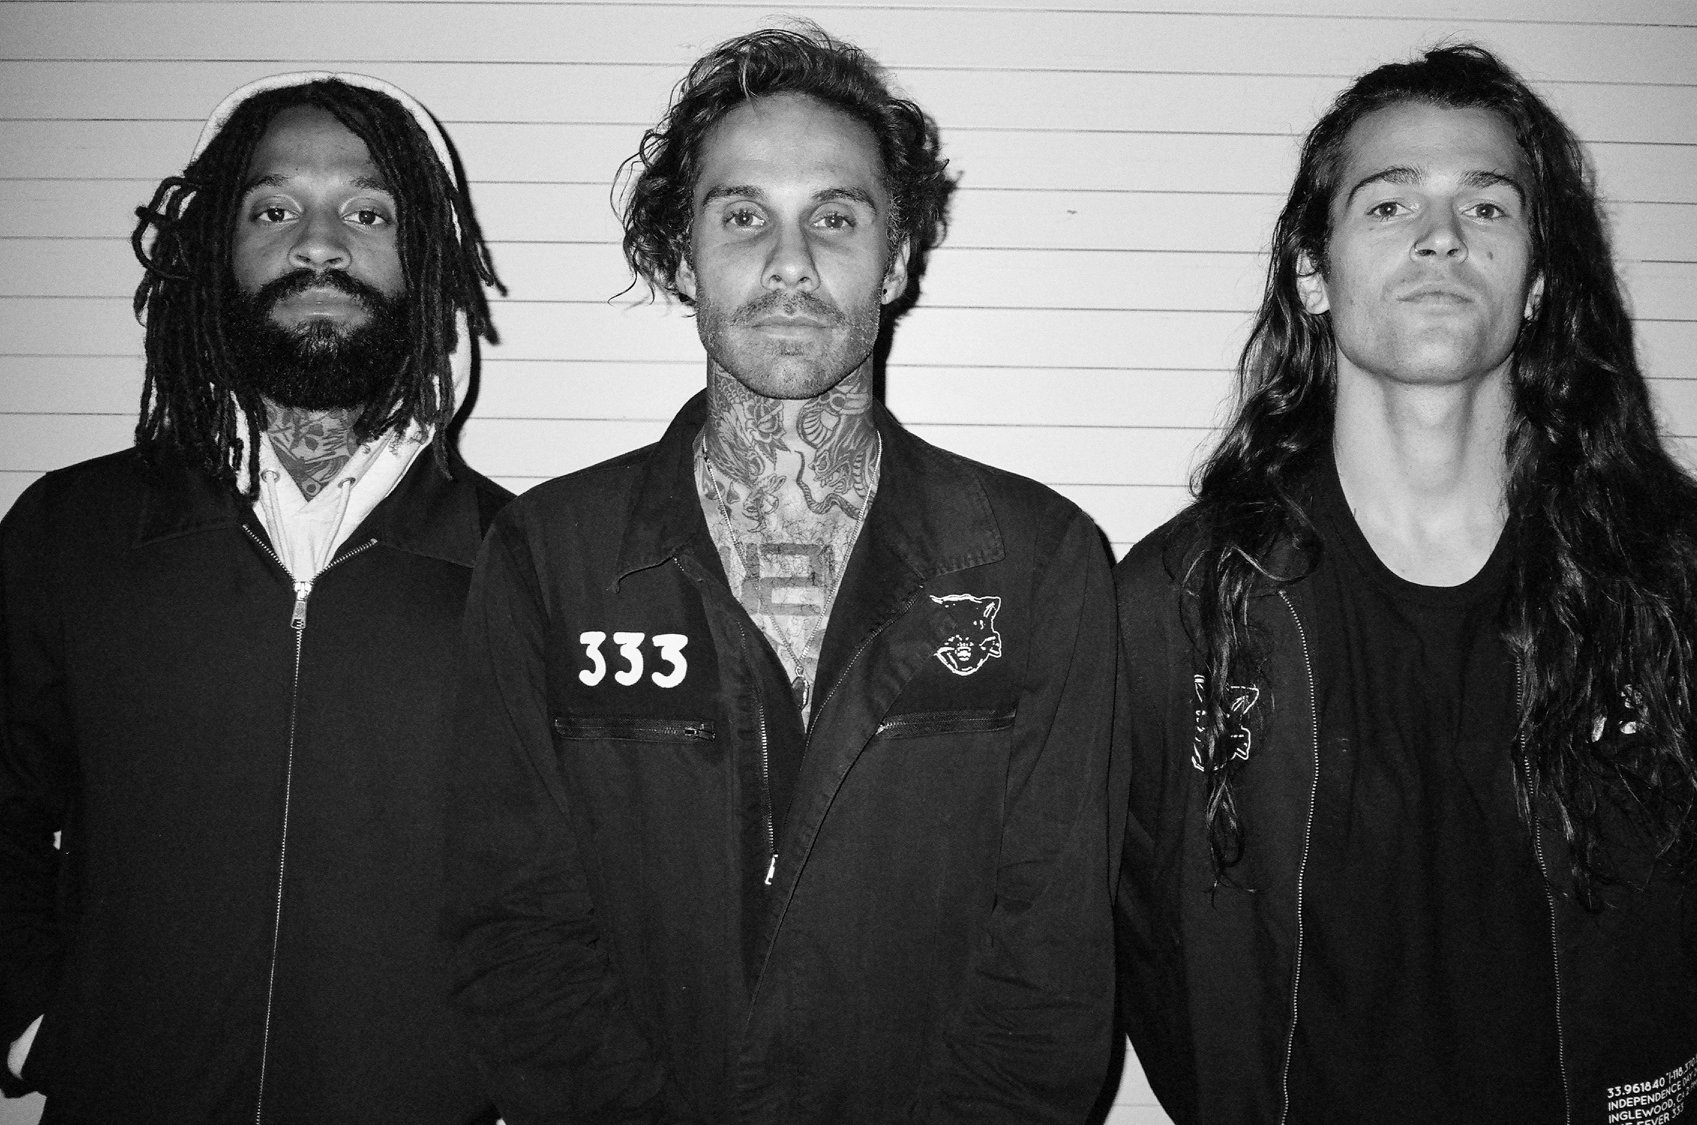 FEVER 333 ANNOUNCE ‘WRONG GENERATION’ EP + VIRTUAL WORLD TOUR